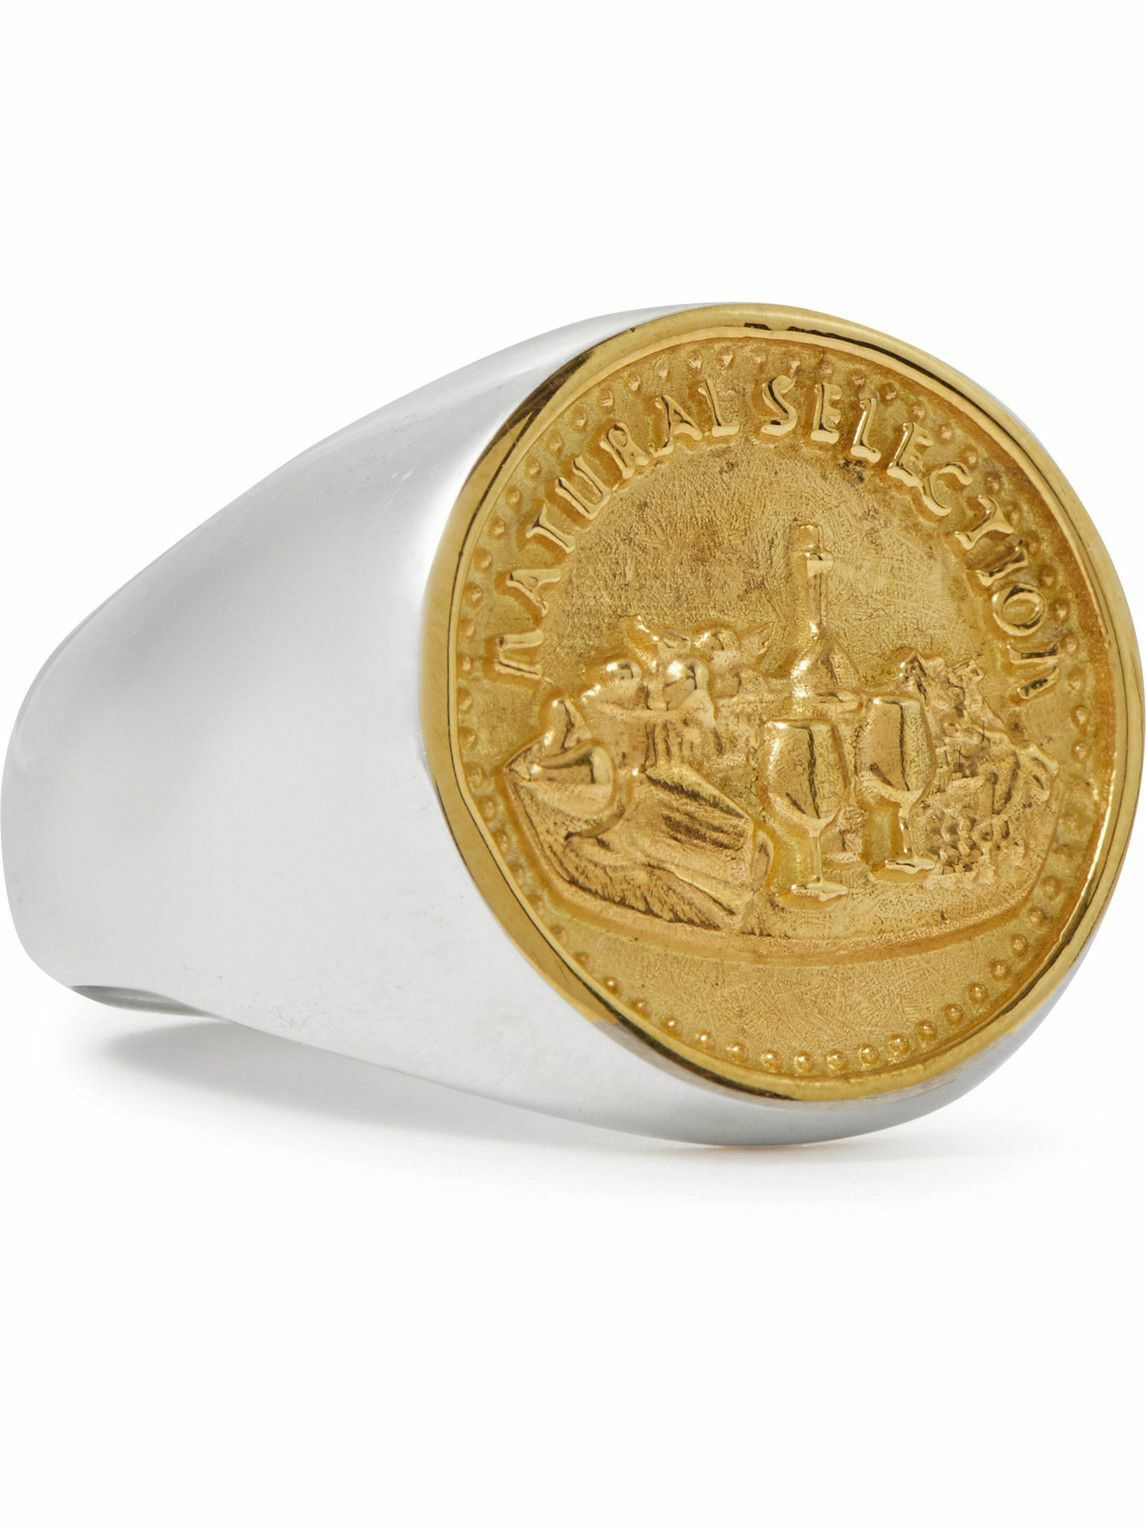 MAPLE - Natural Selection Silver and Gold Signet Ring - Silver Maple